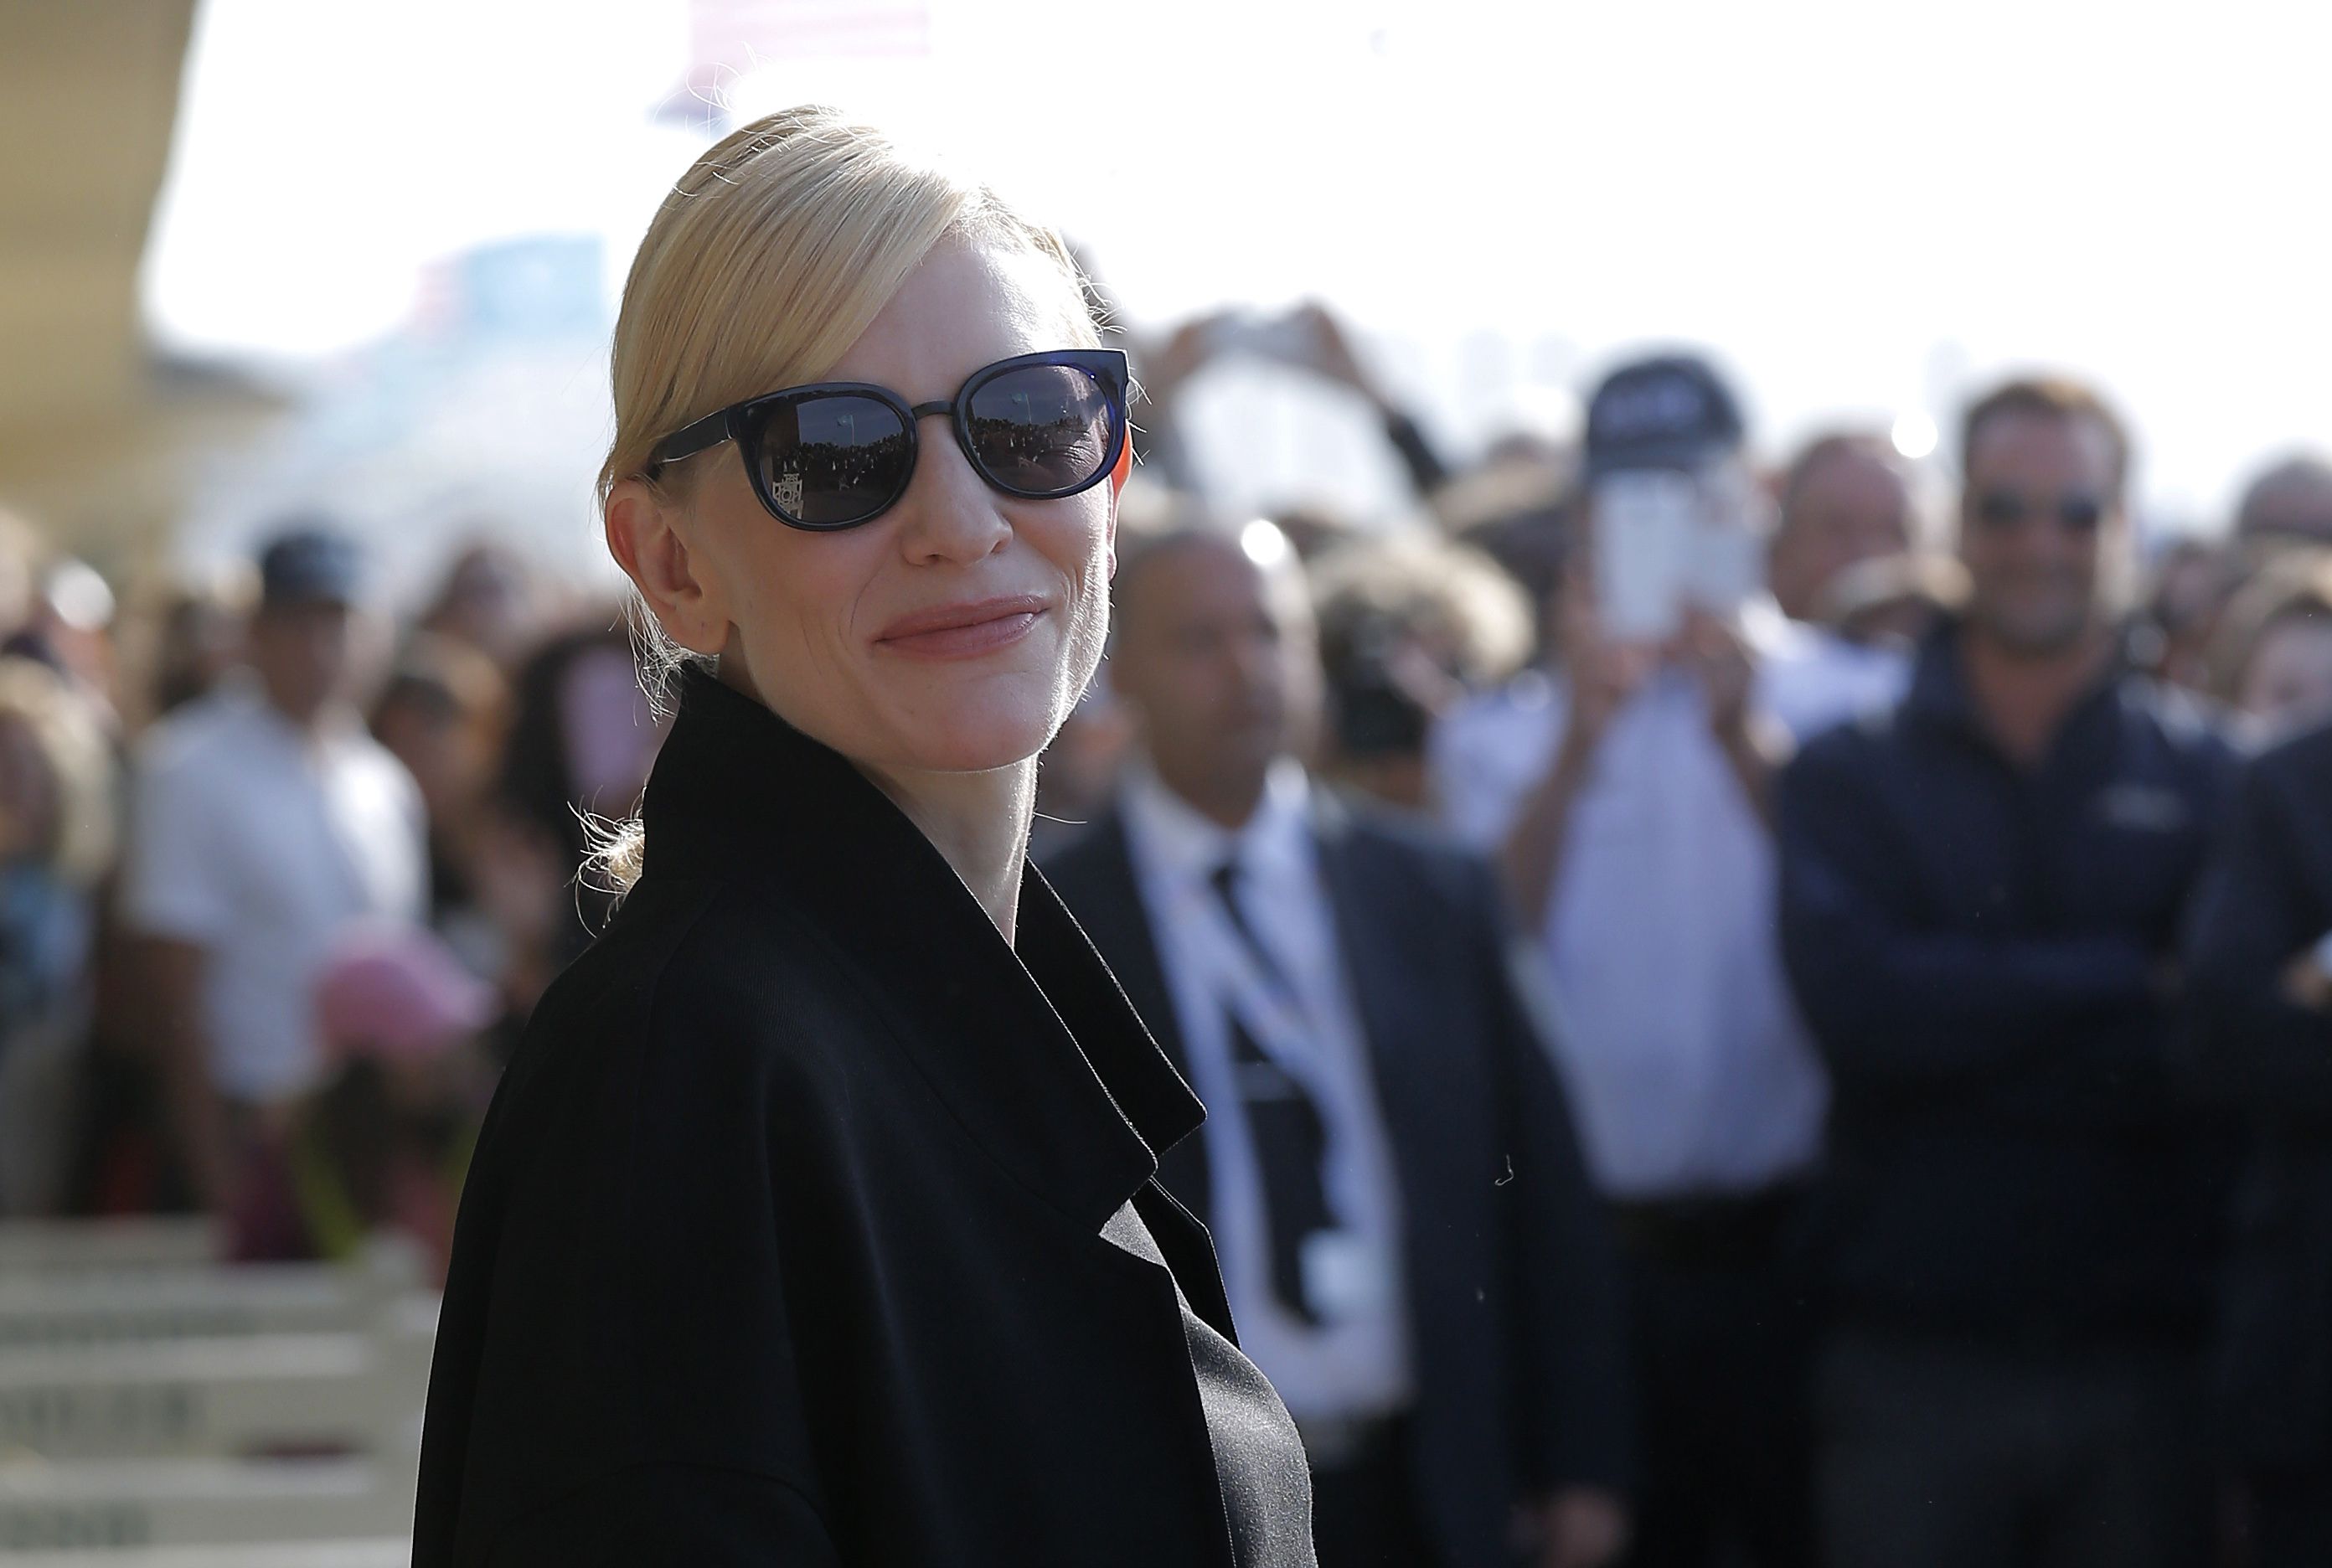 Cate Blanchett on Woody Allen: 'He Just Doesn't Get Fashion